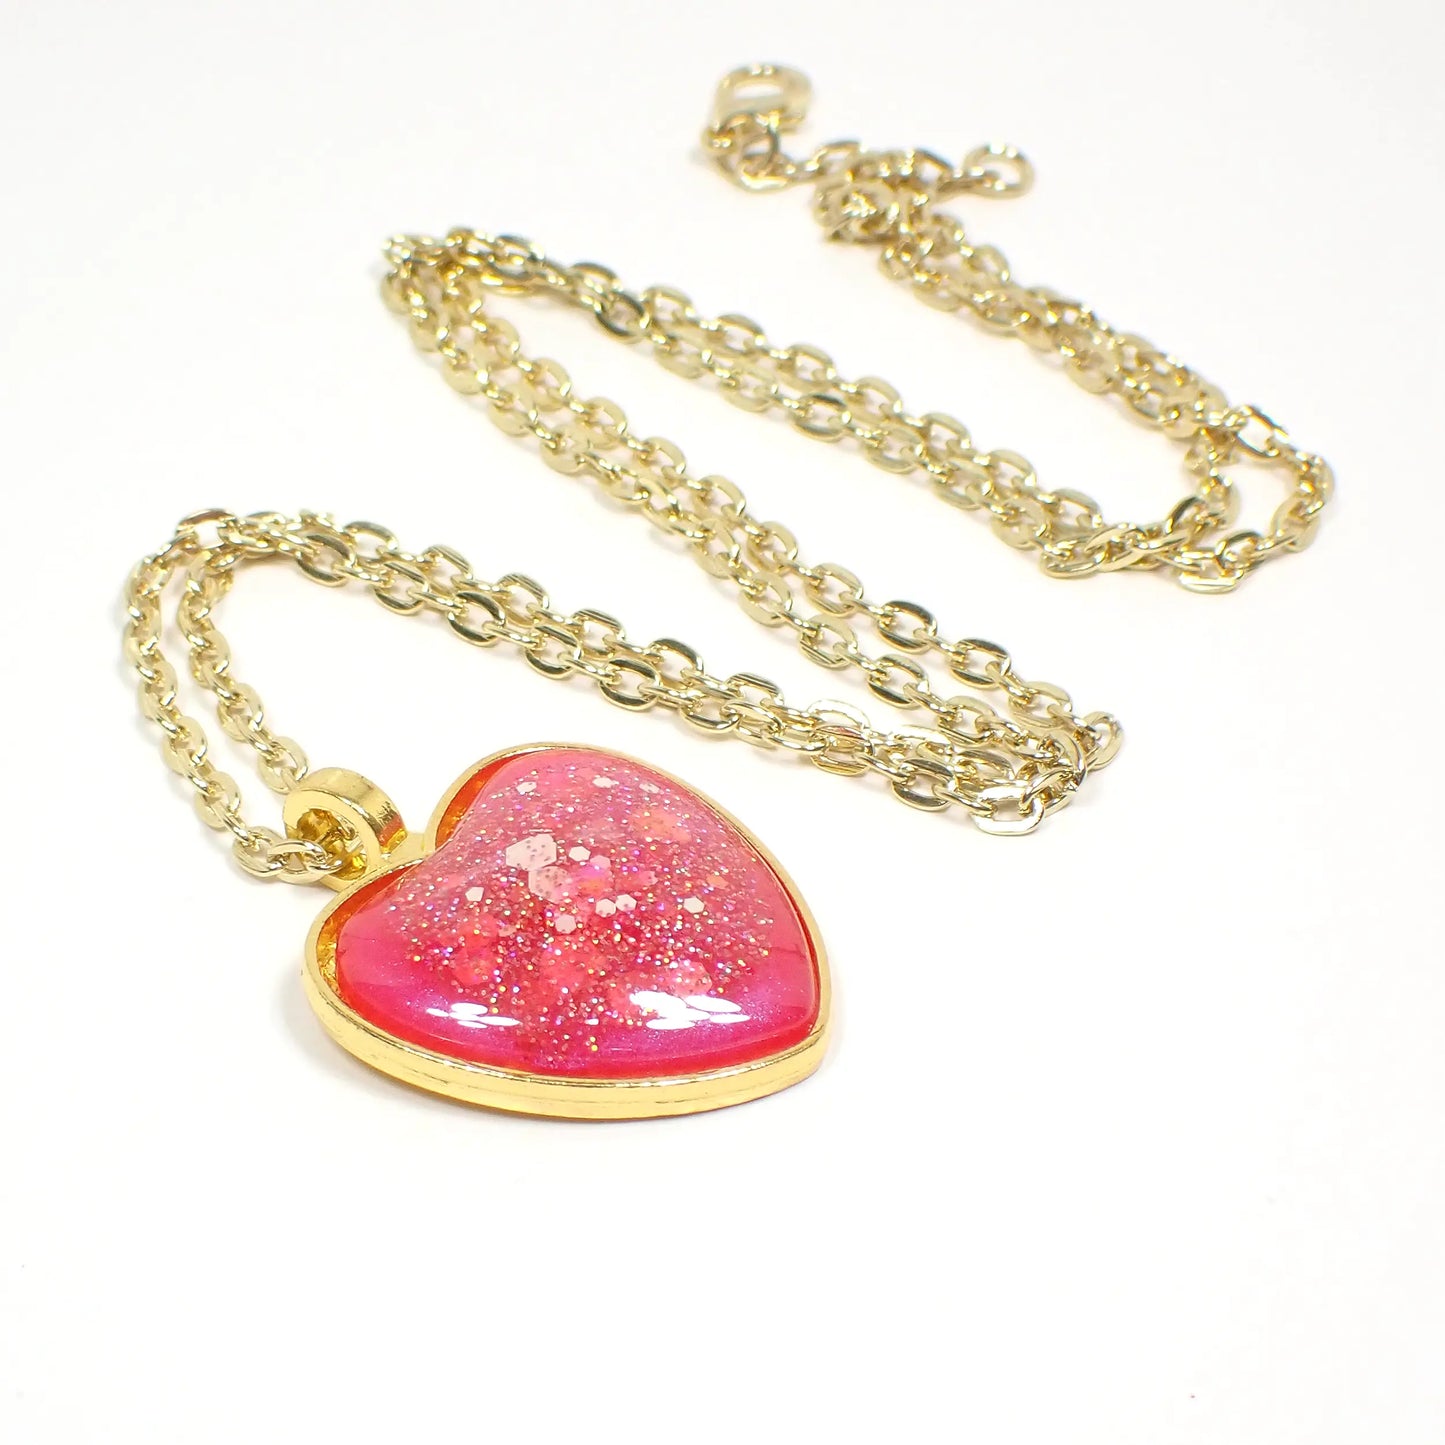 Handmade Bright Pink Resin Heart Pendant Necklace with Iridescent Glitter, Gold Plated